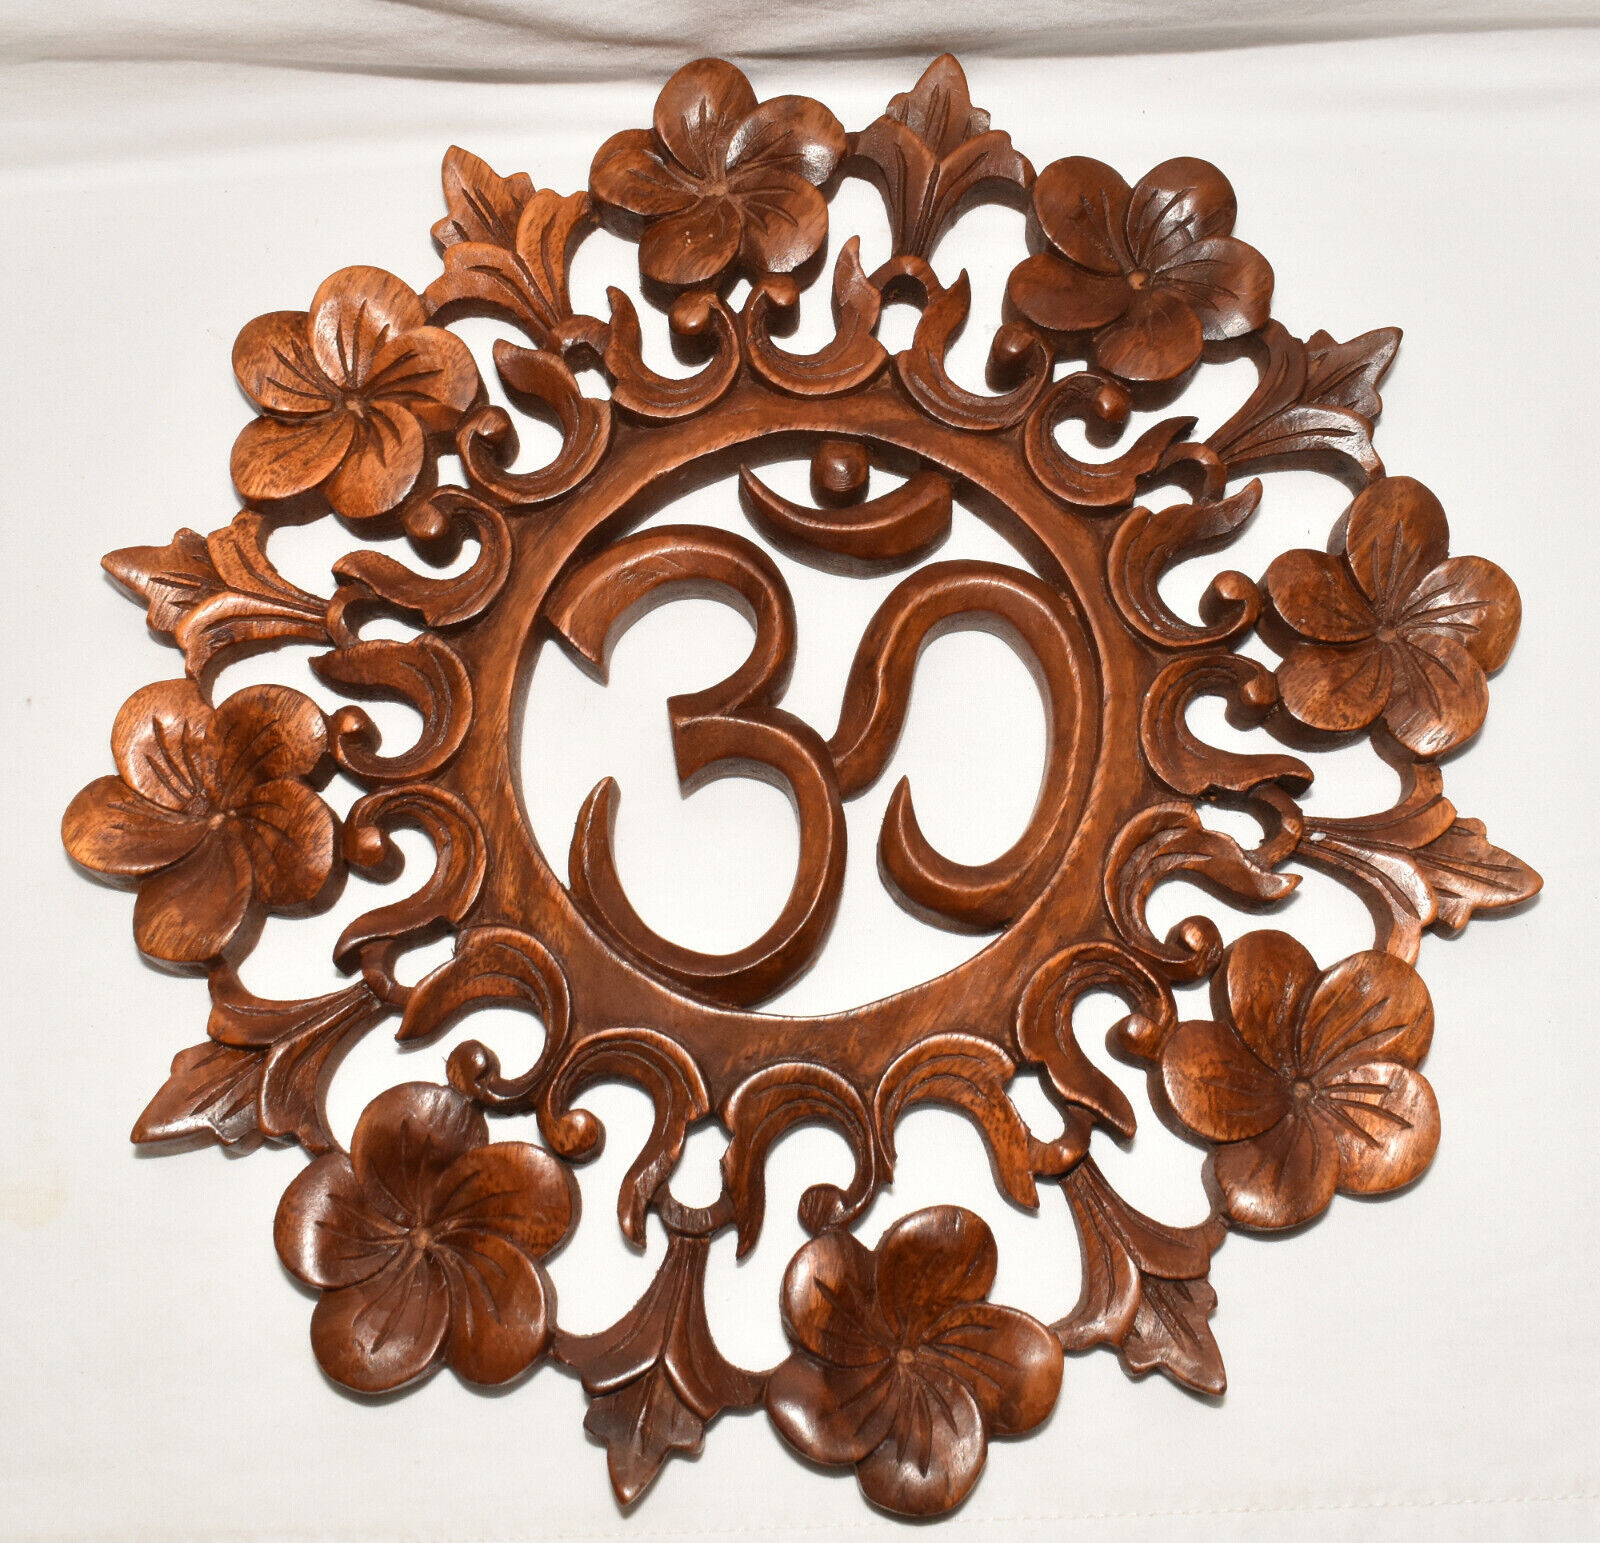 Primary image for Indonesian Hindu Om Plaque Hand Carved Wood Wall Relief Symbol of Divinity